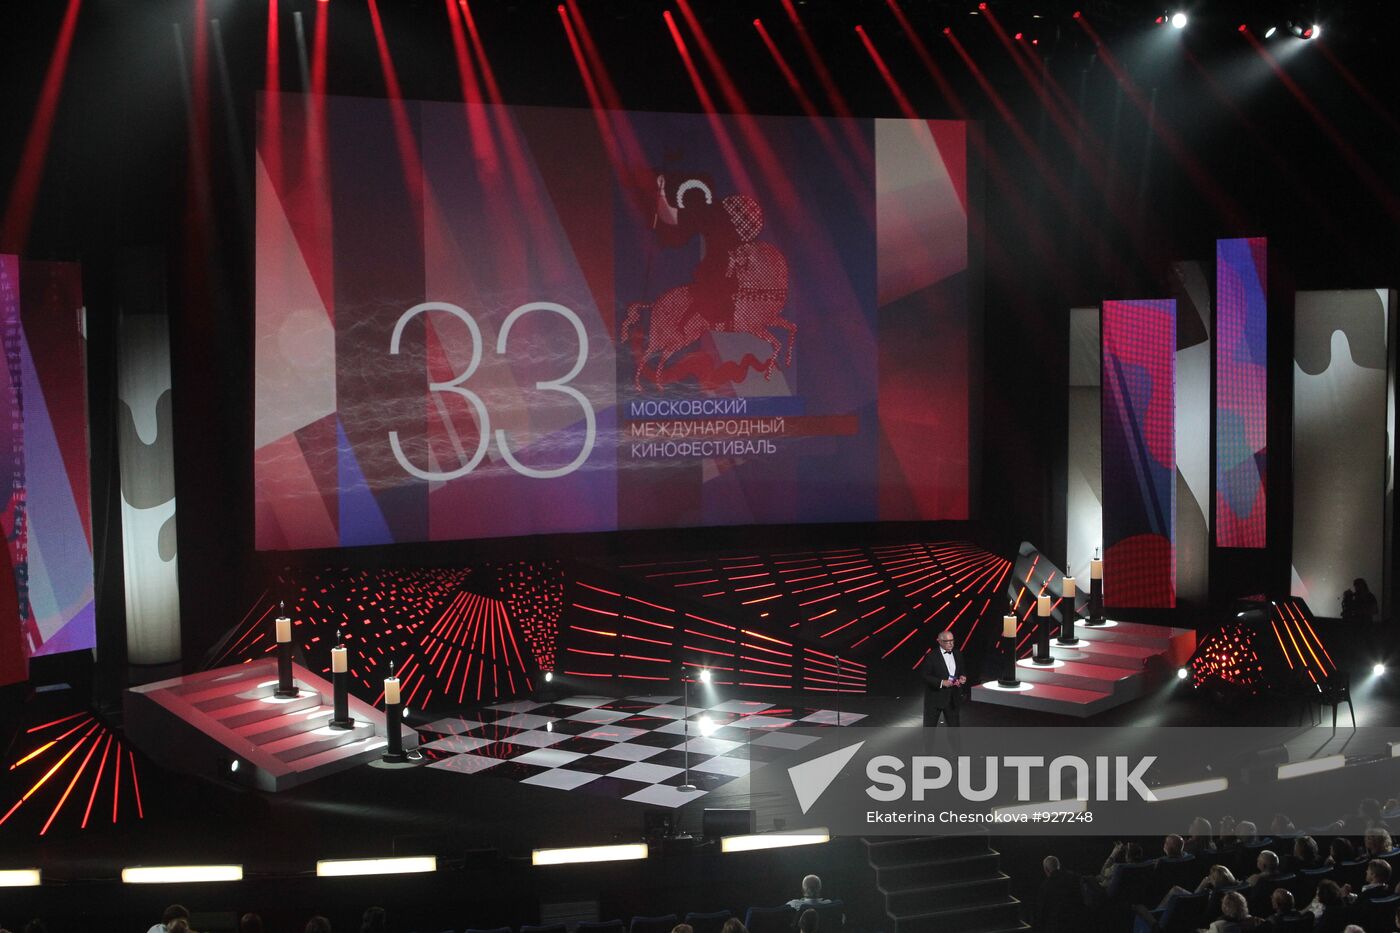 33rd Moscow International Film Festival opening